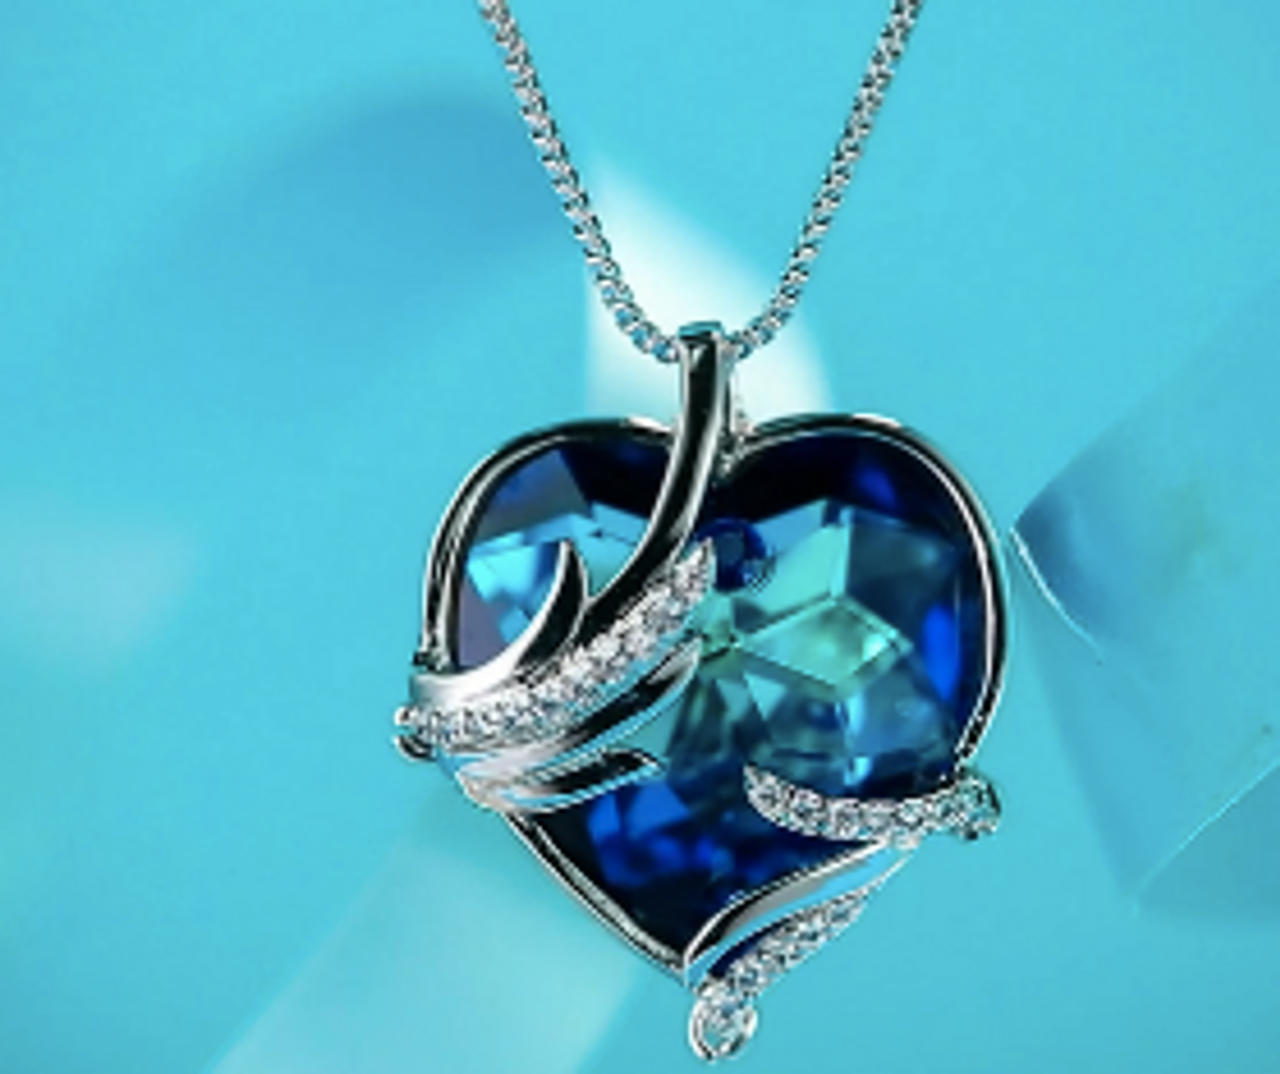 Angel Wings Crystal Heart Pendant - Blue / Green with 18" Chain Necklace. Gift for Lover, Girl Friend, Wife, Valentine's Day Gift, Mother's Day, Anniversary Gift Necklace.